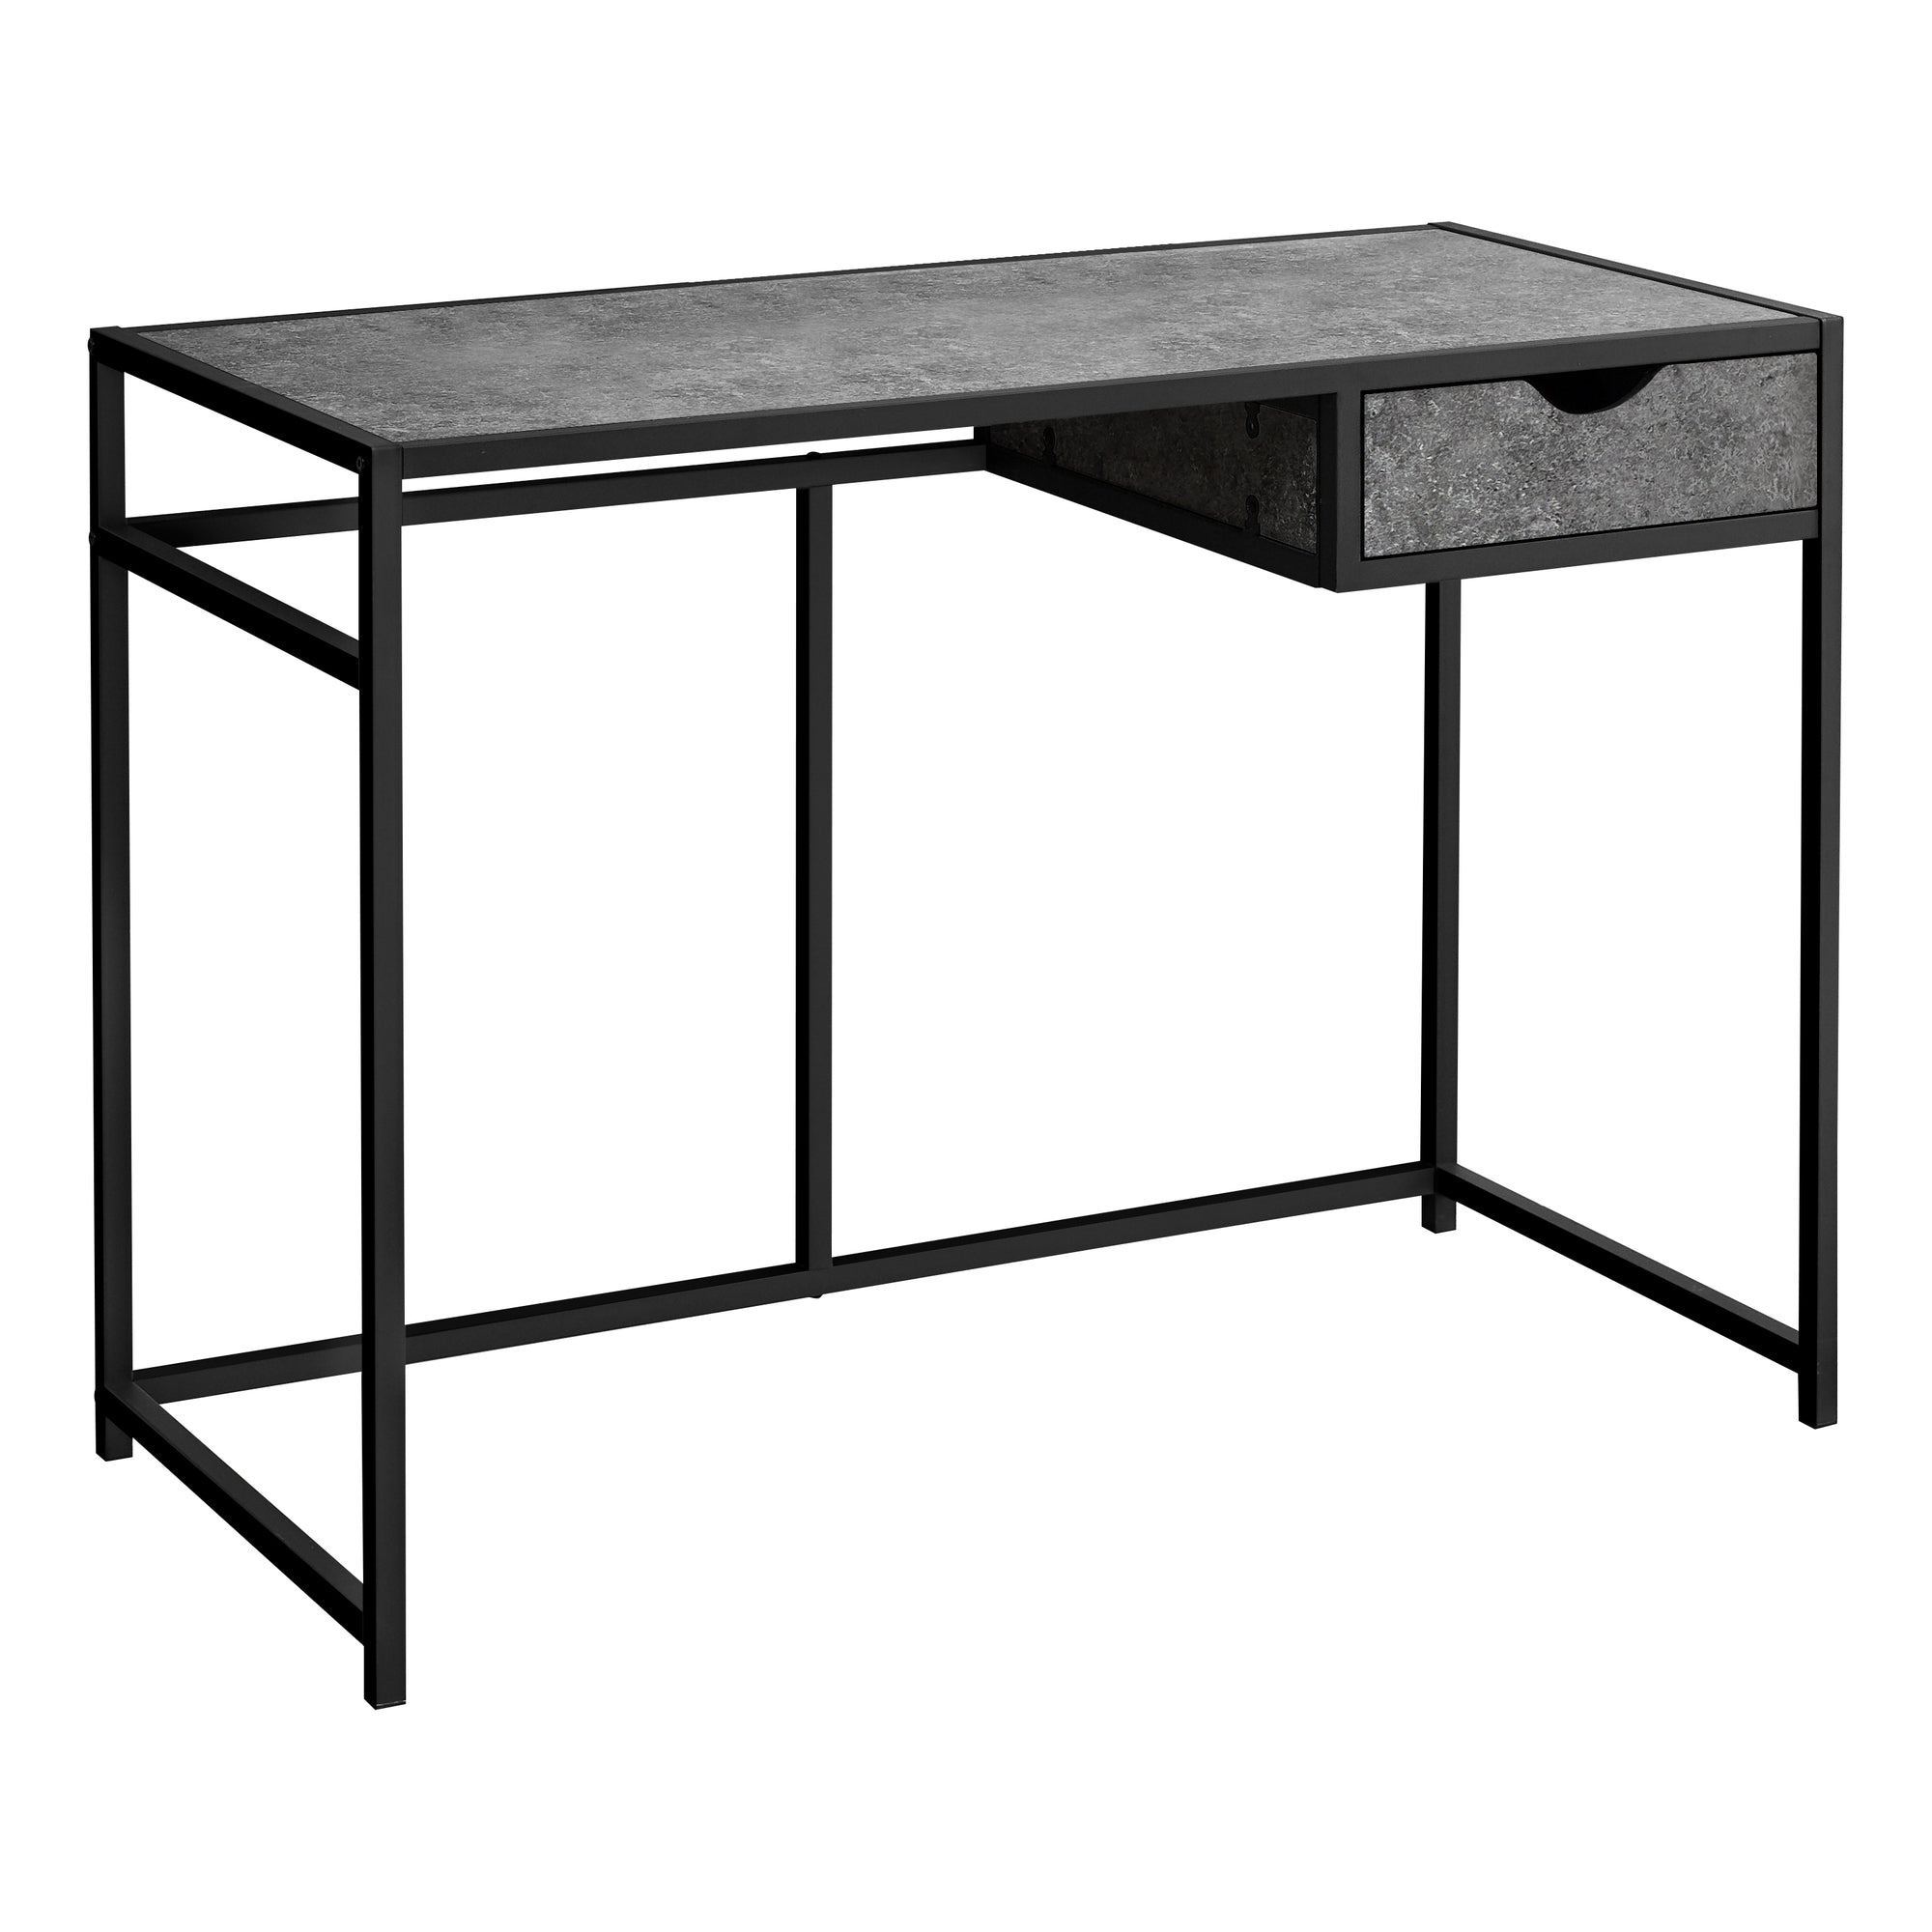 MN-957573    Computer Desk, Home Office, Laptop, Storage Drawers, 42"L, Metal, Laminate, Grey Stone Look, Black, Contemporary, Industrial, Modern